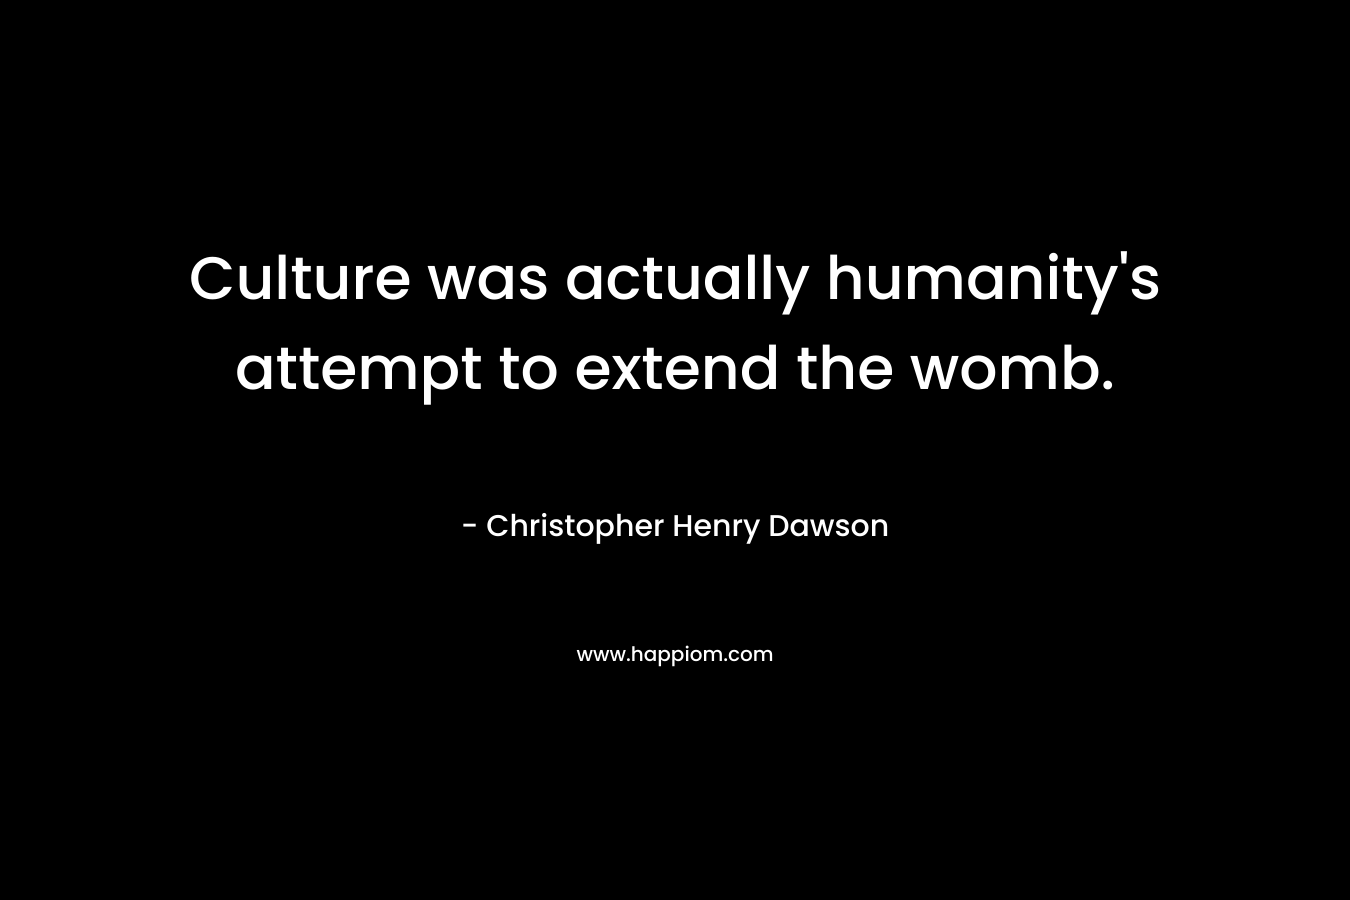 Culture was actually humanity's attempt to extend the womb.